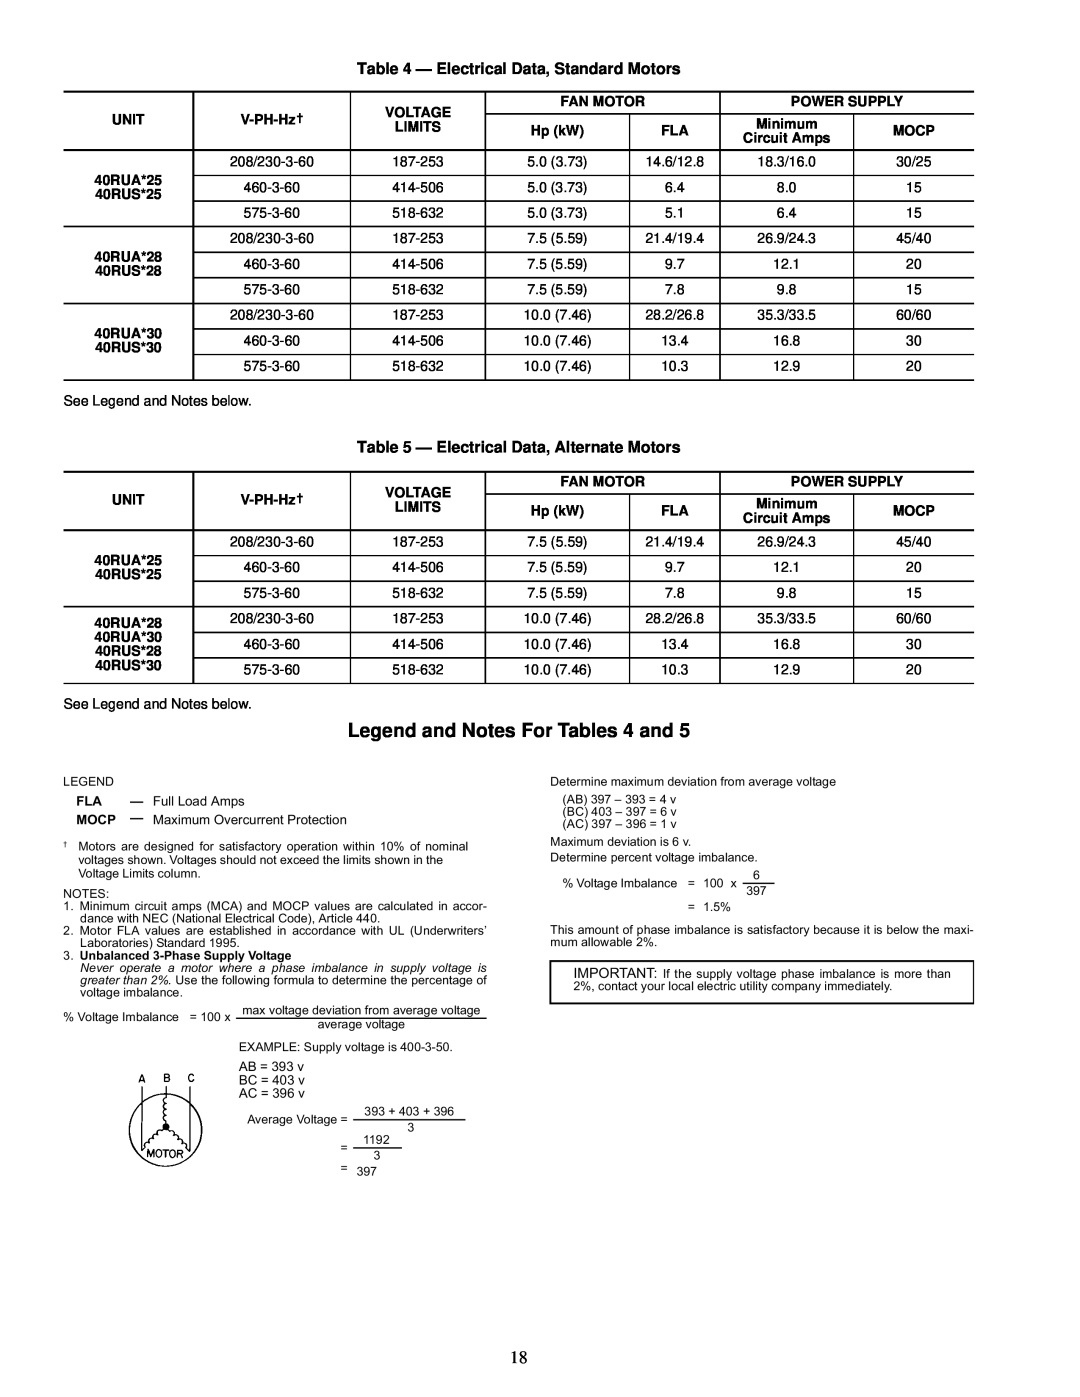 Carrier R-410A Legend and Notes For Tables 4 and, Electrical Data, Standard Motors, Electrical Data, Alternate Motors 